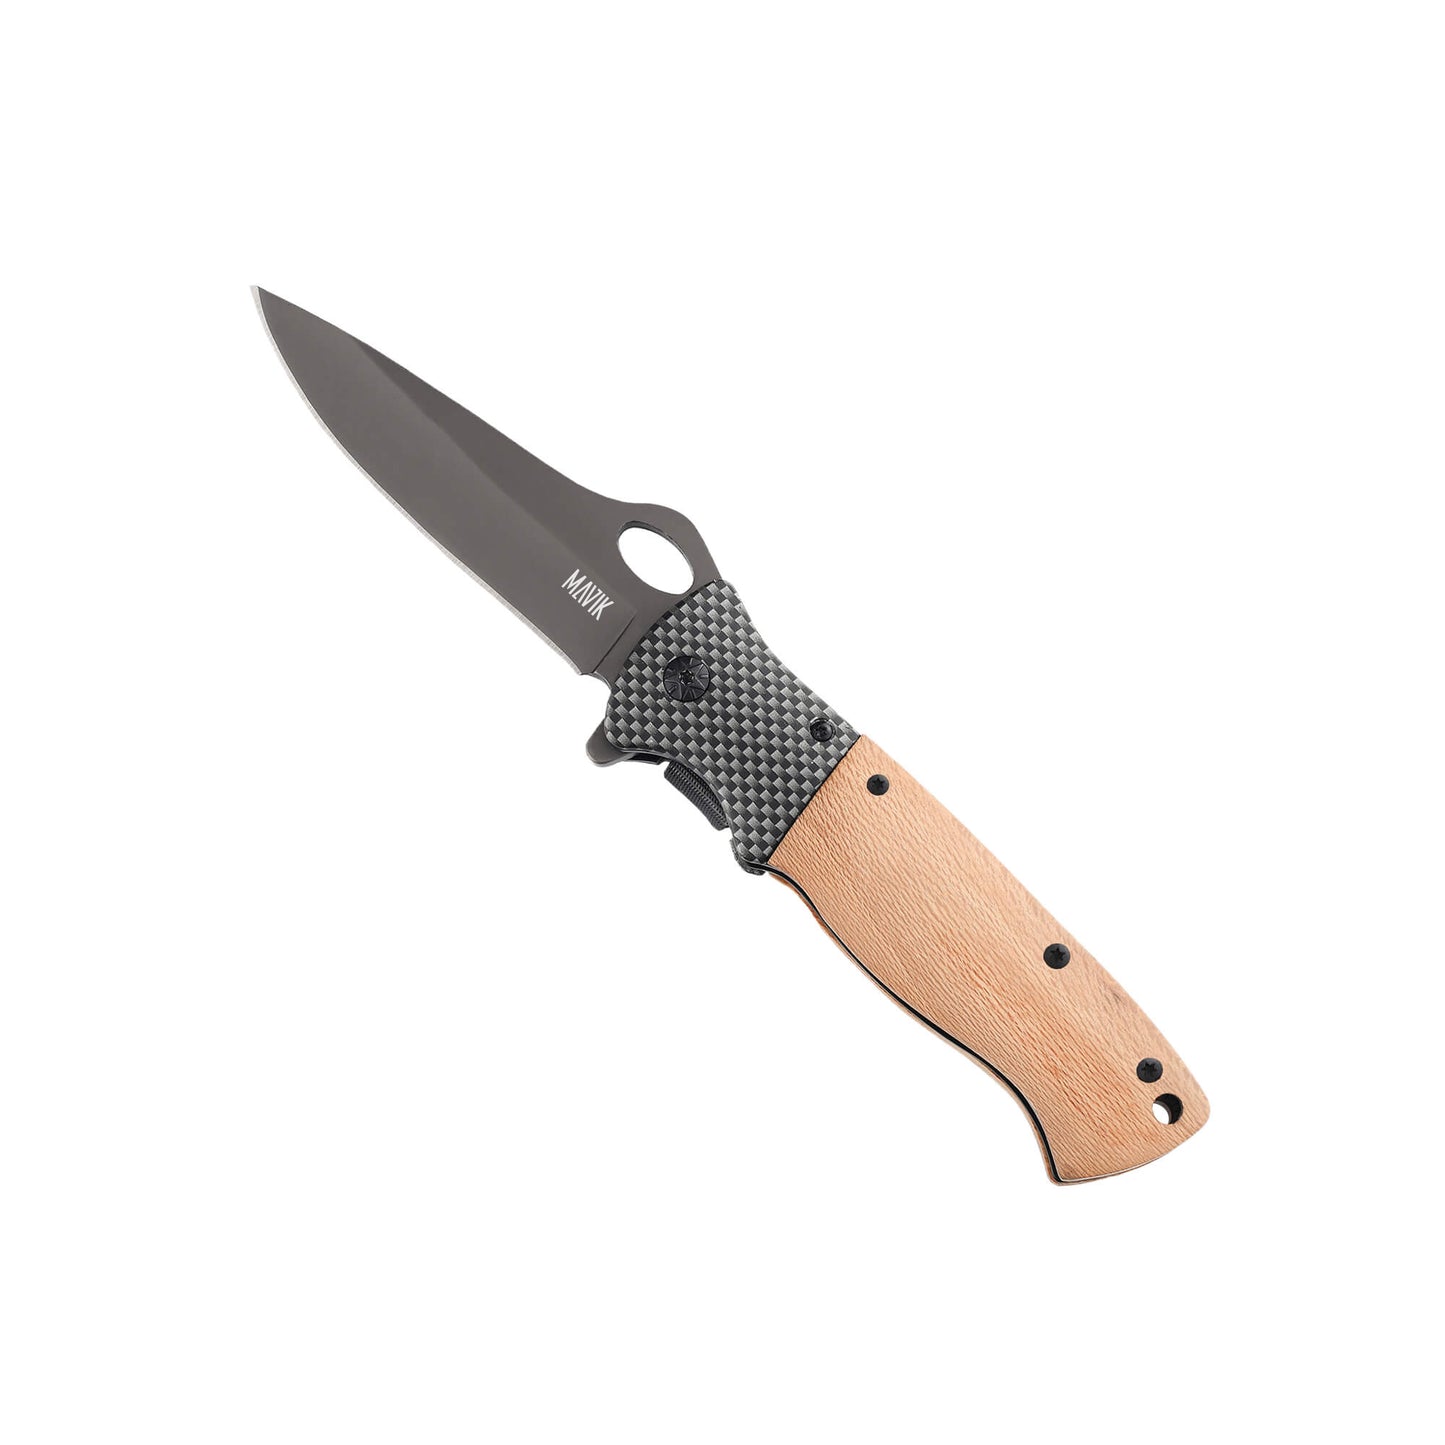 Folding knife Slacker from Mavik Gear with 440C gray steel drop point blade, wood handle, lanyard hole and hip clip.